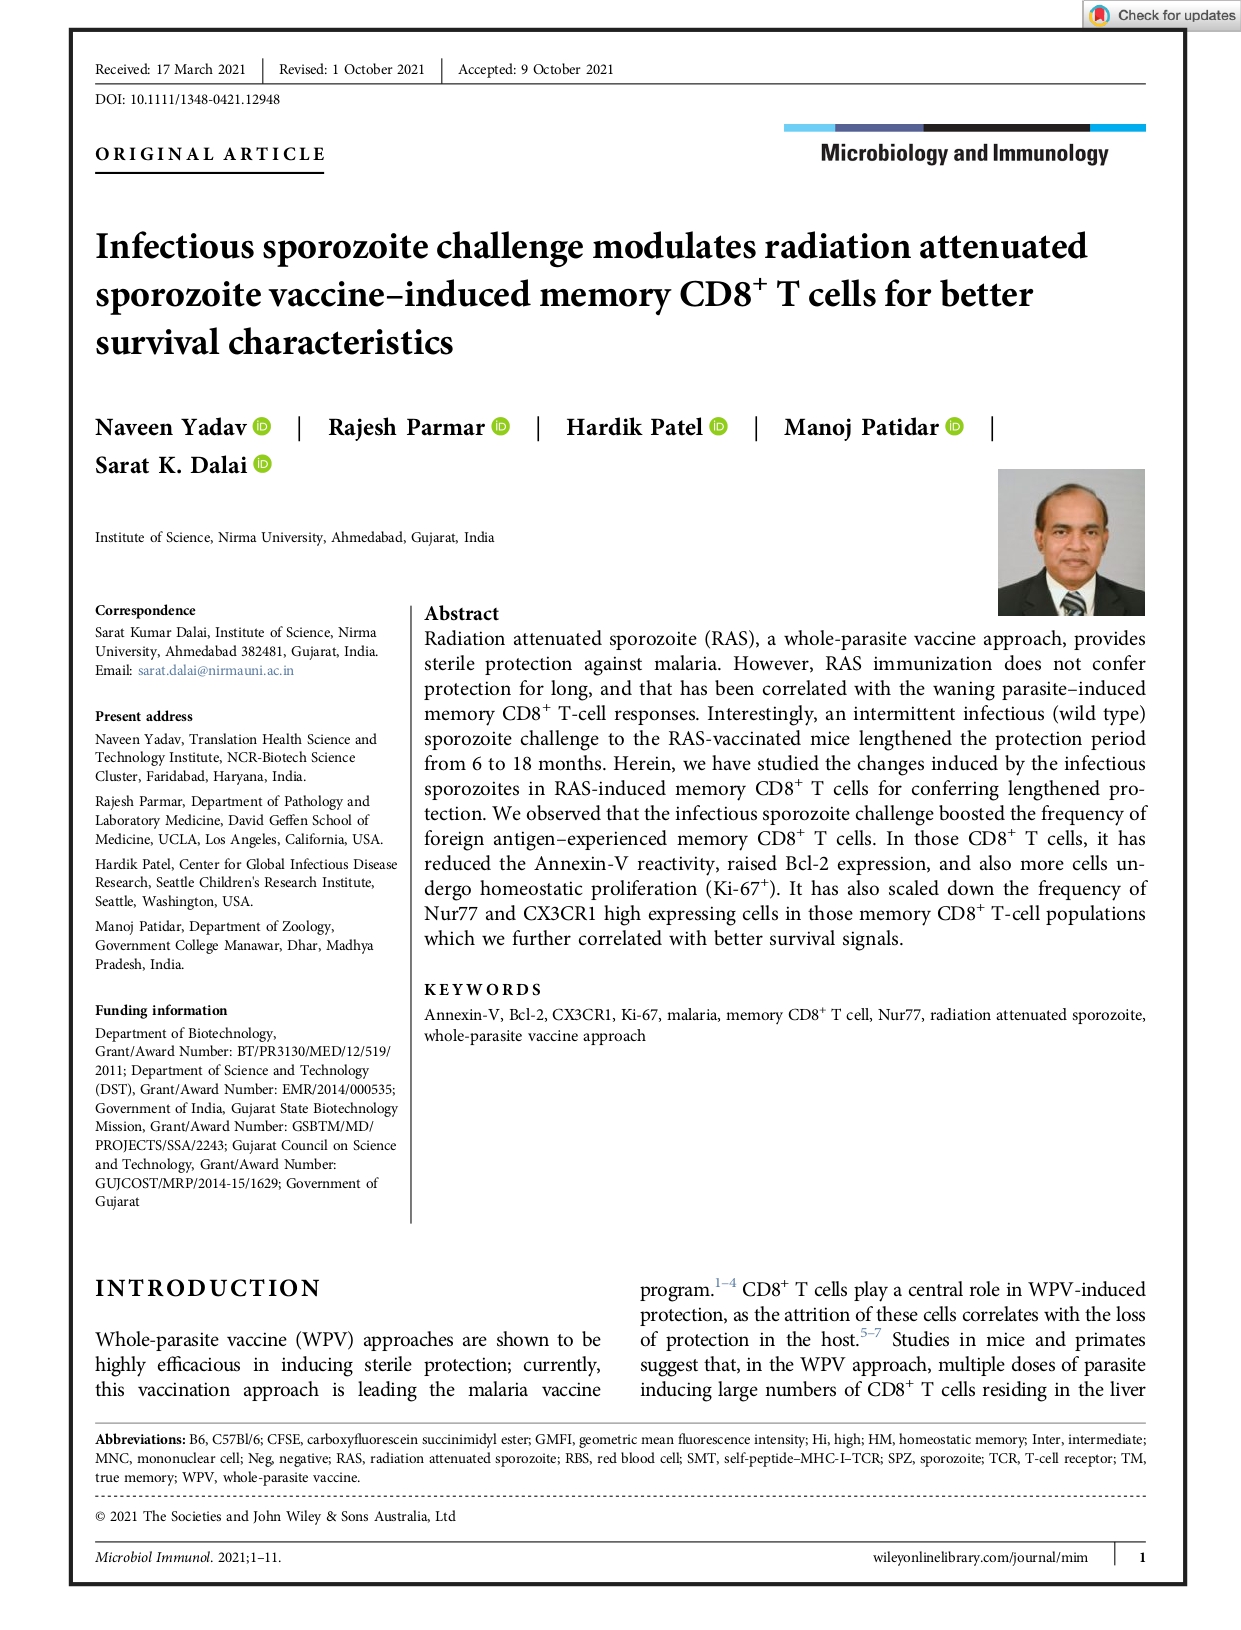 Infectious sporozoite challenge modulates radiation attenuated sporozoite vaccine?induced memory CD8+ T cells for better survival characteristics